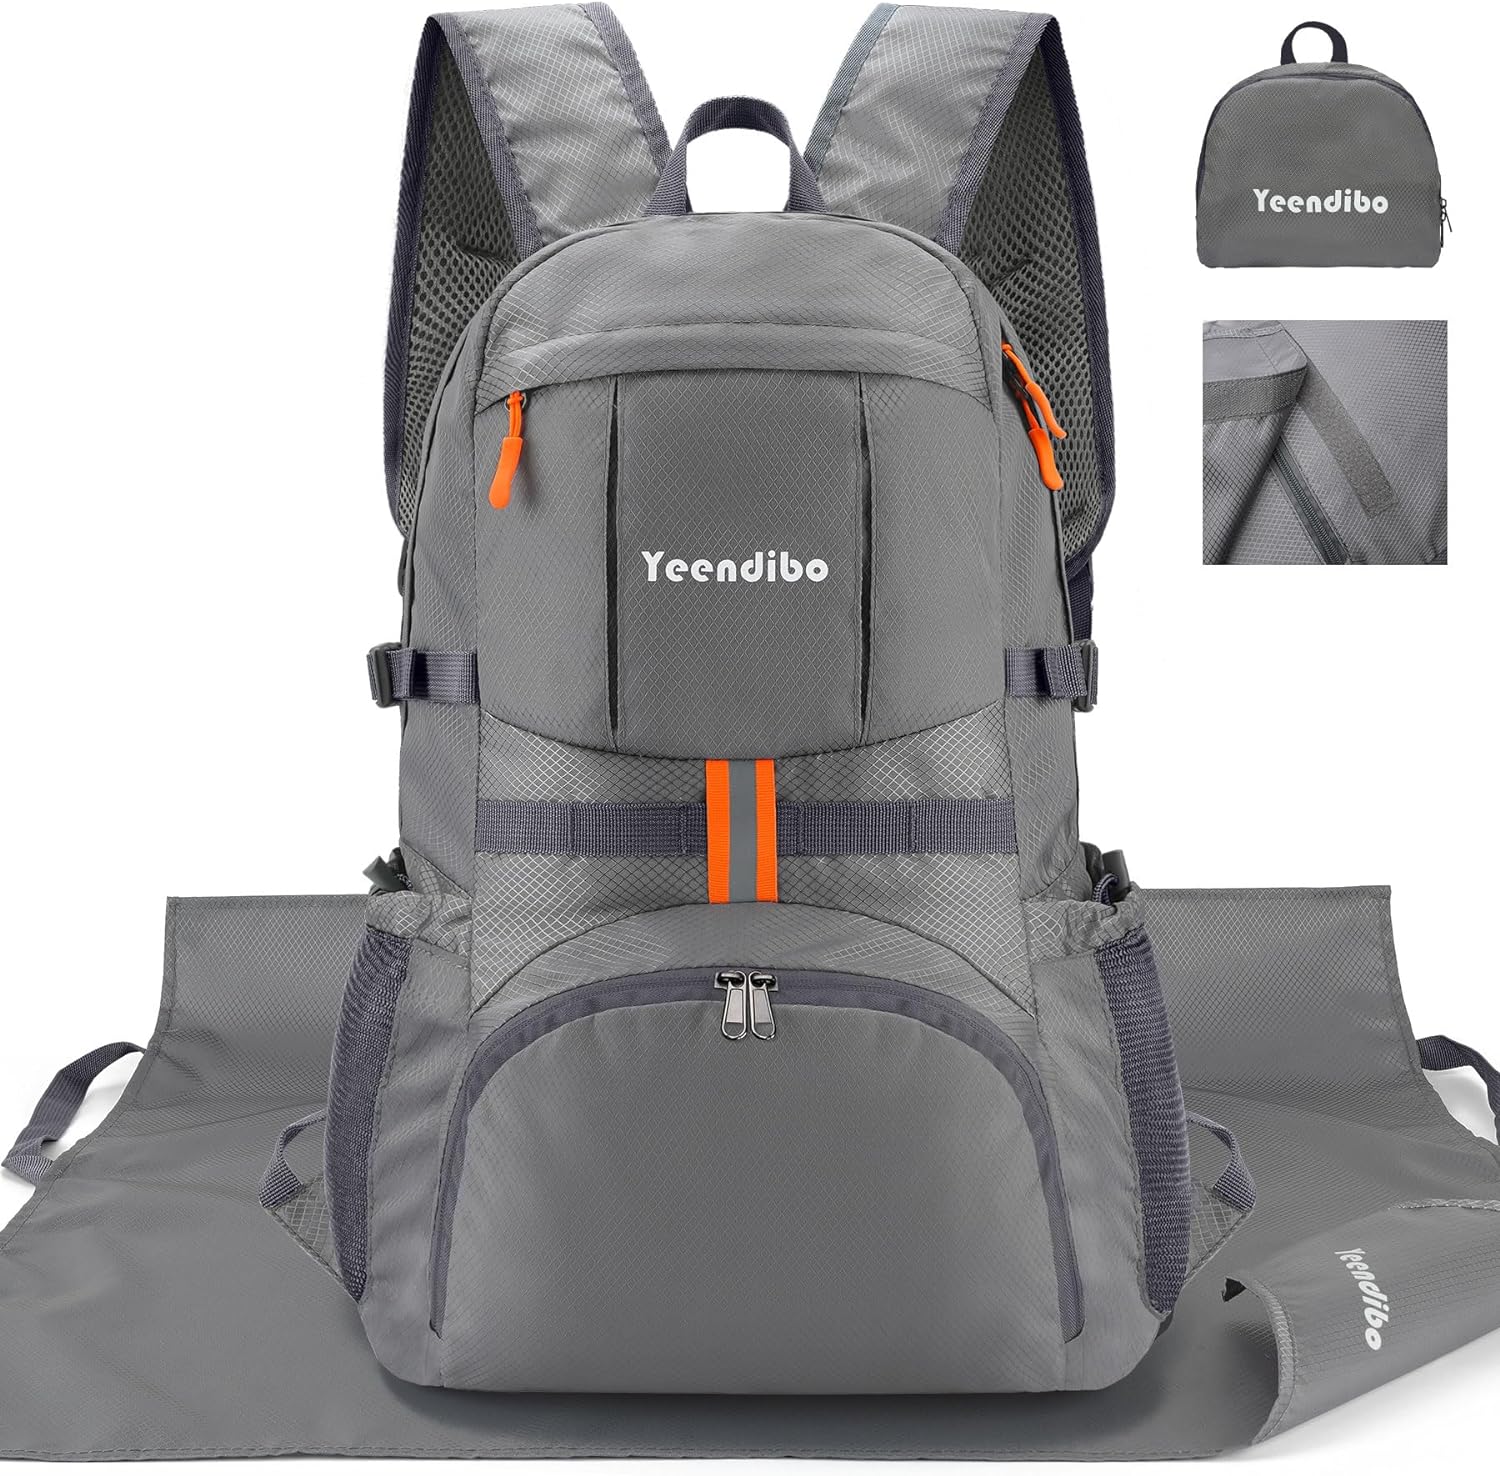 Yeendibo 33L Hiking Backpack with Portable-Rest Station for Camping/Travel, VersatileLightweight Daypack (Gray, Non-waterproof)